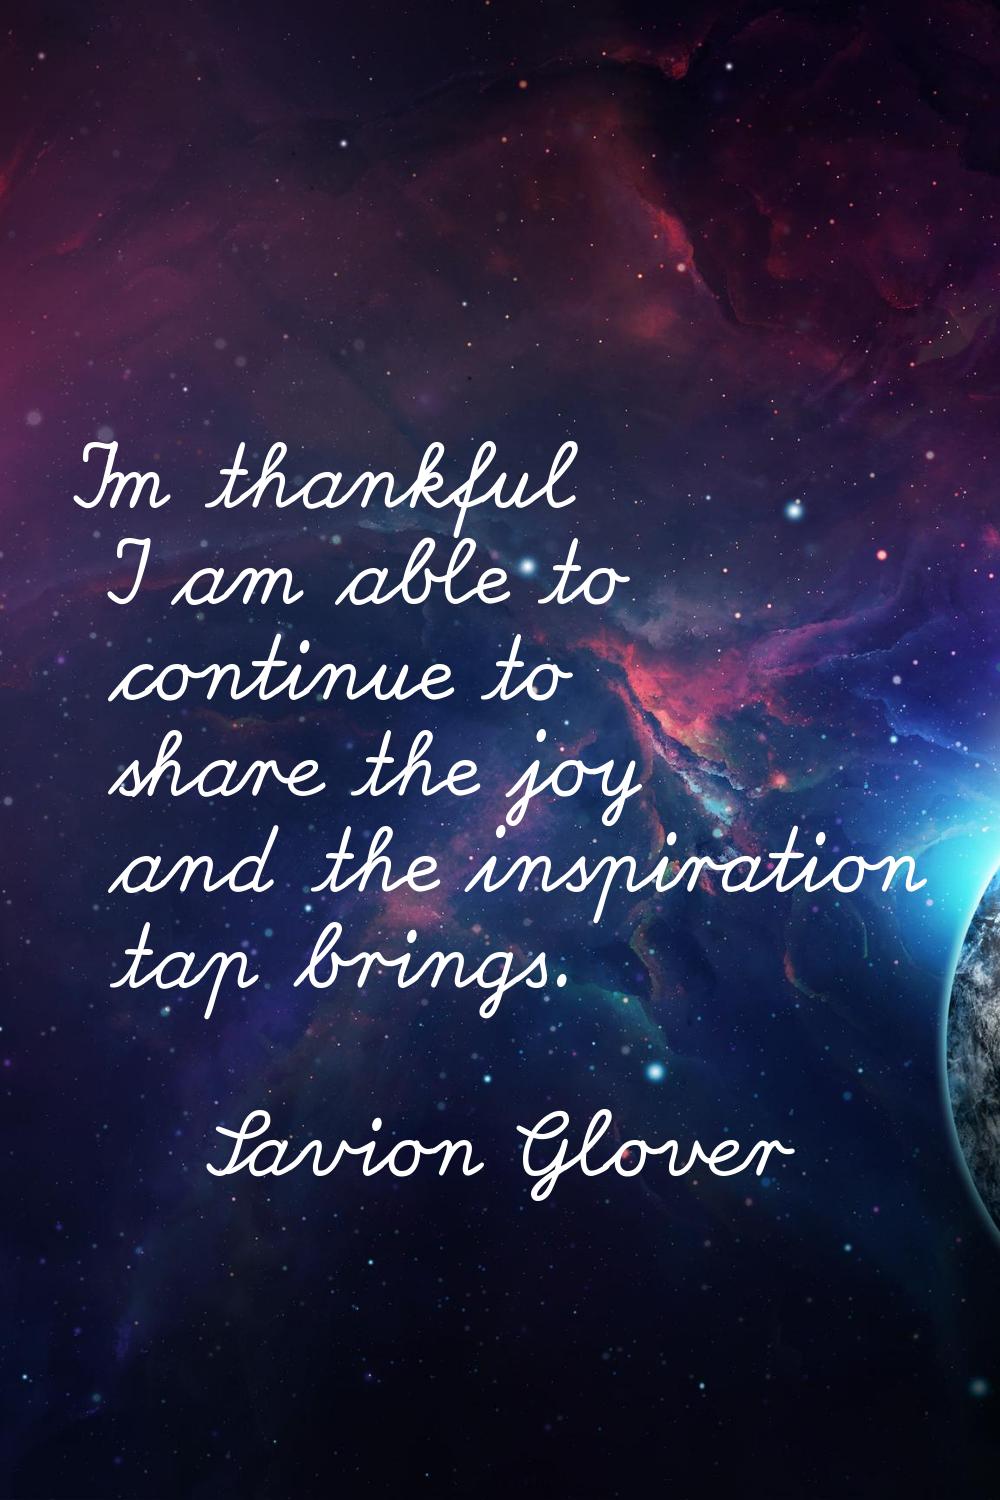 I'm thankful I am able to continue to share the joy and the inspiration tap brings.